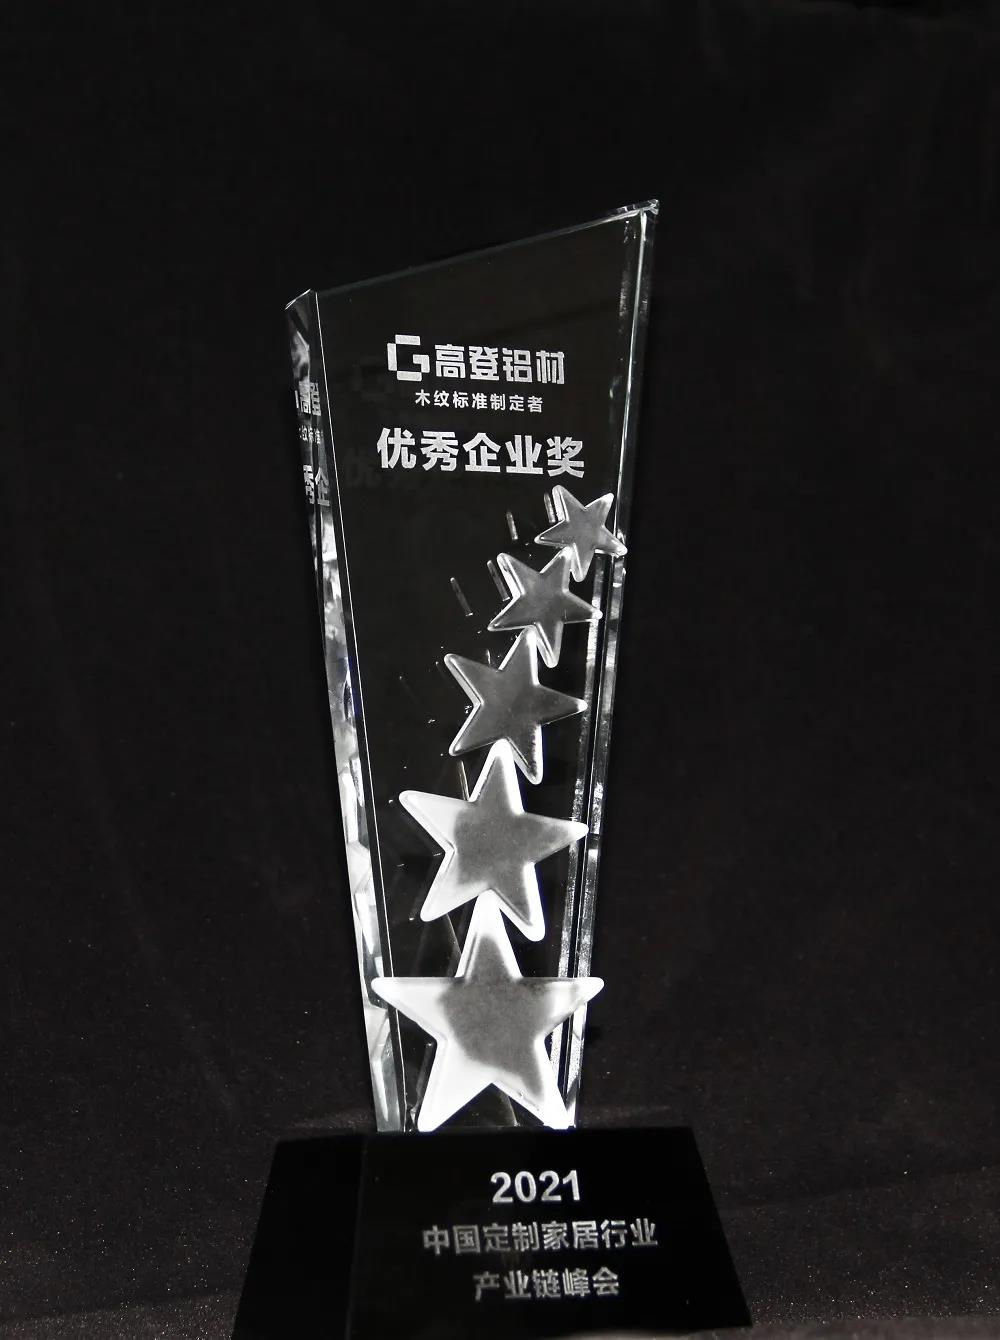 2021 China Custom Home Industry Chain Summit Outstanding Enterprise Medal